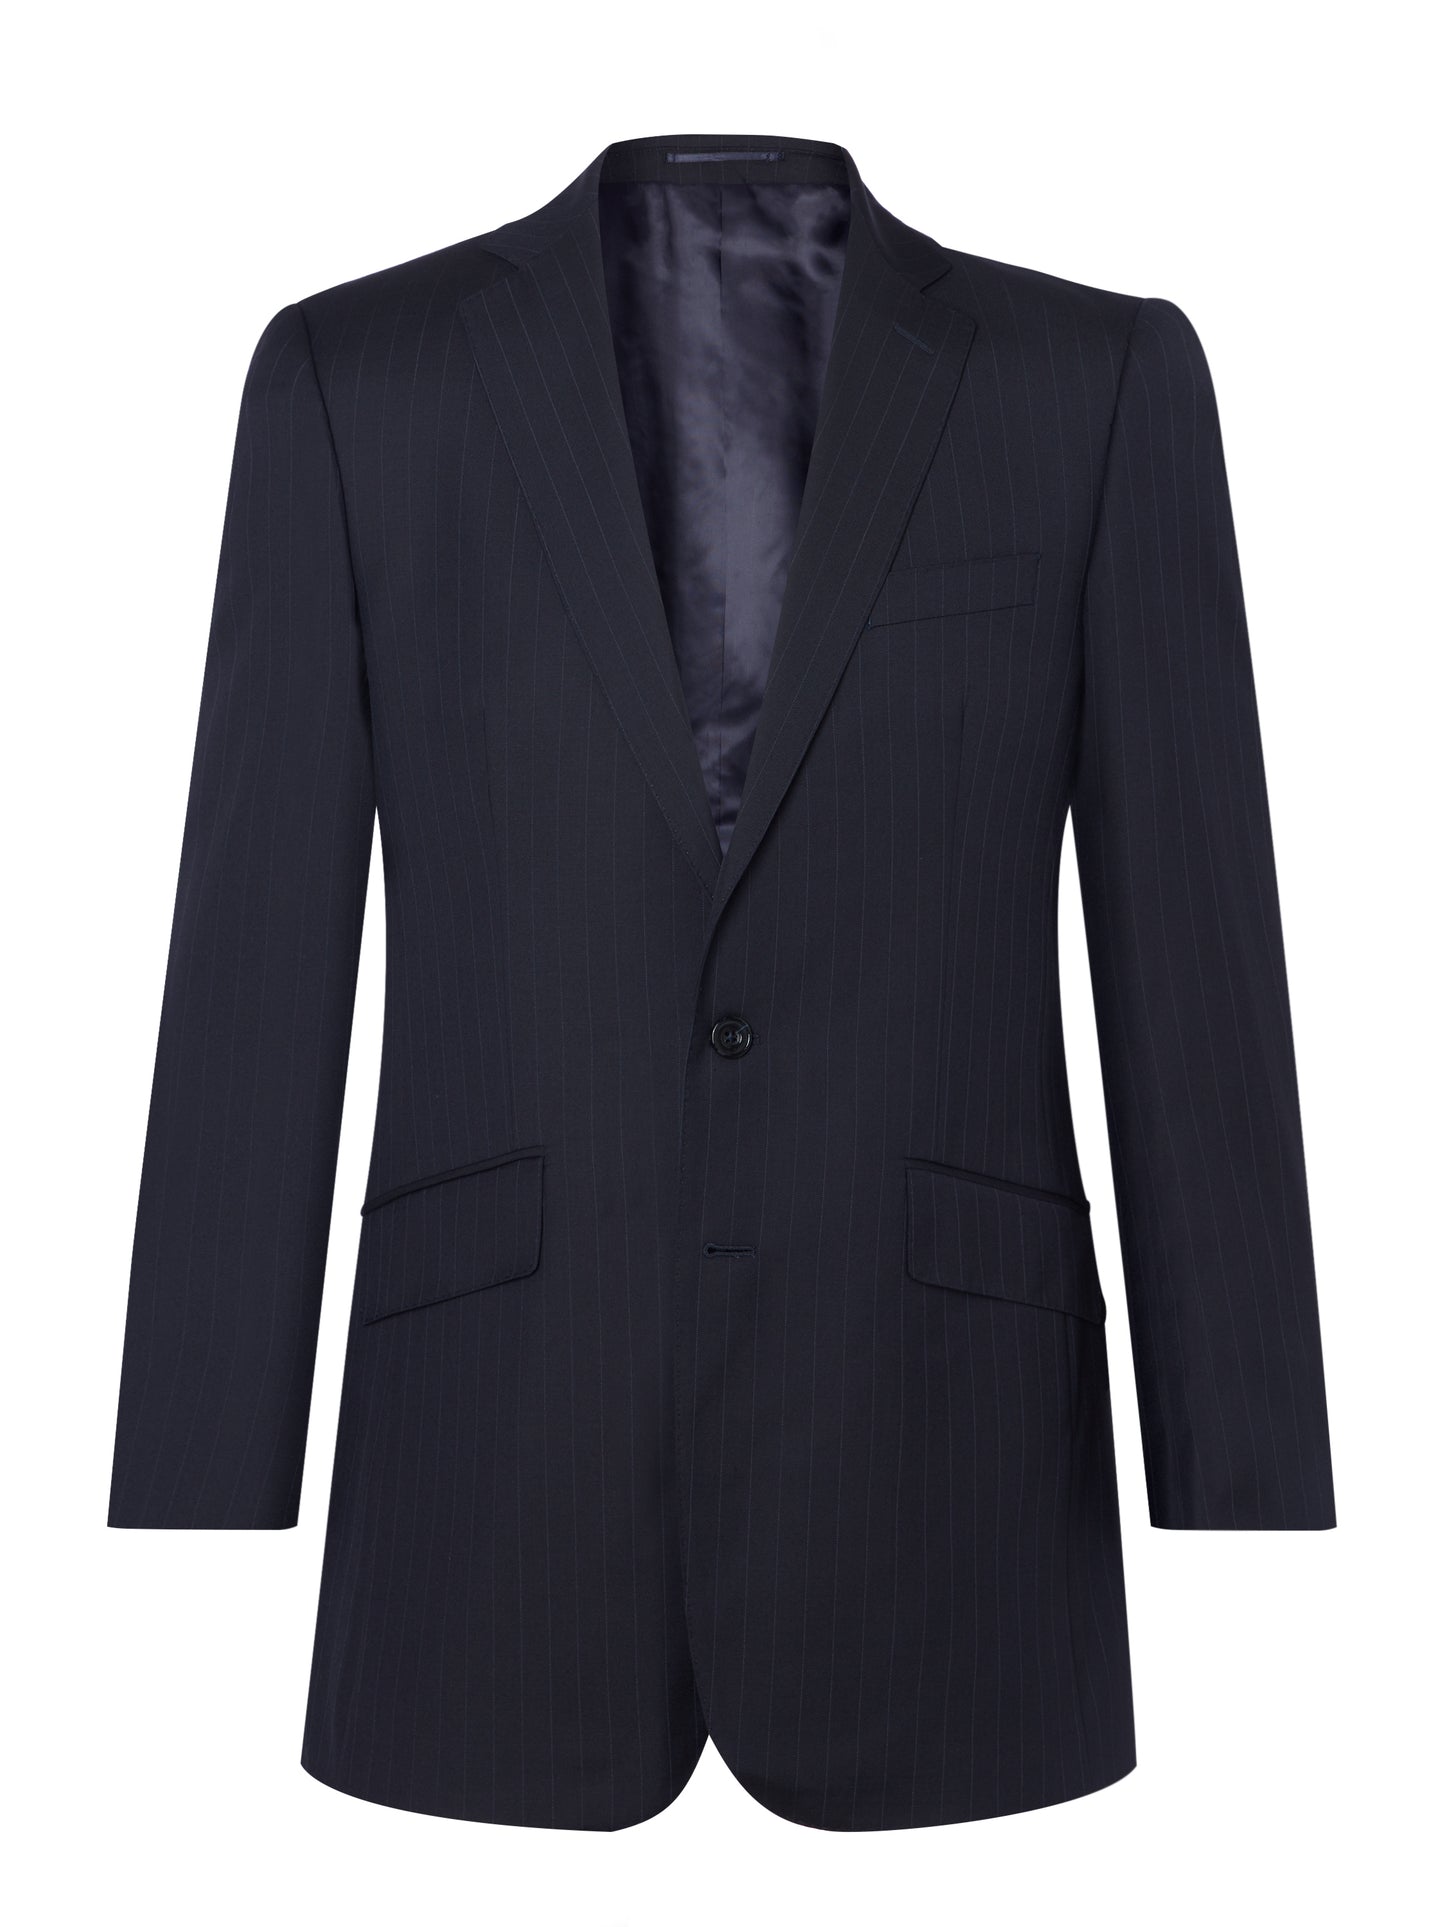 Limited Edition Sloane Suit - Lightweight Navy Pinhead